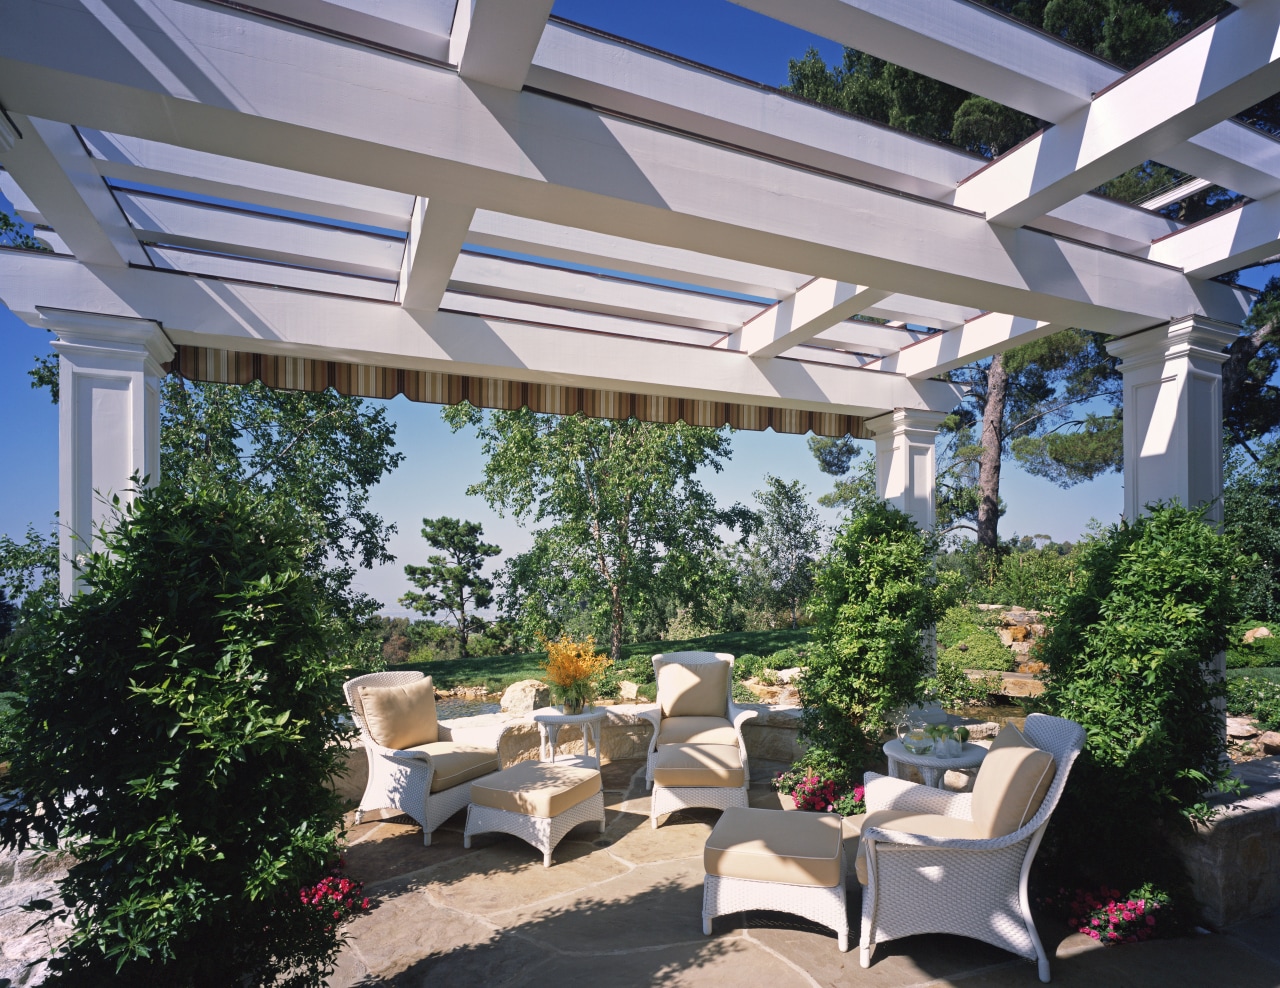 Outdoor living area features pergola &amp; furniture canopy, outdoor structure, patio, pergola, real estate, roof, shade, gray